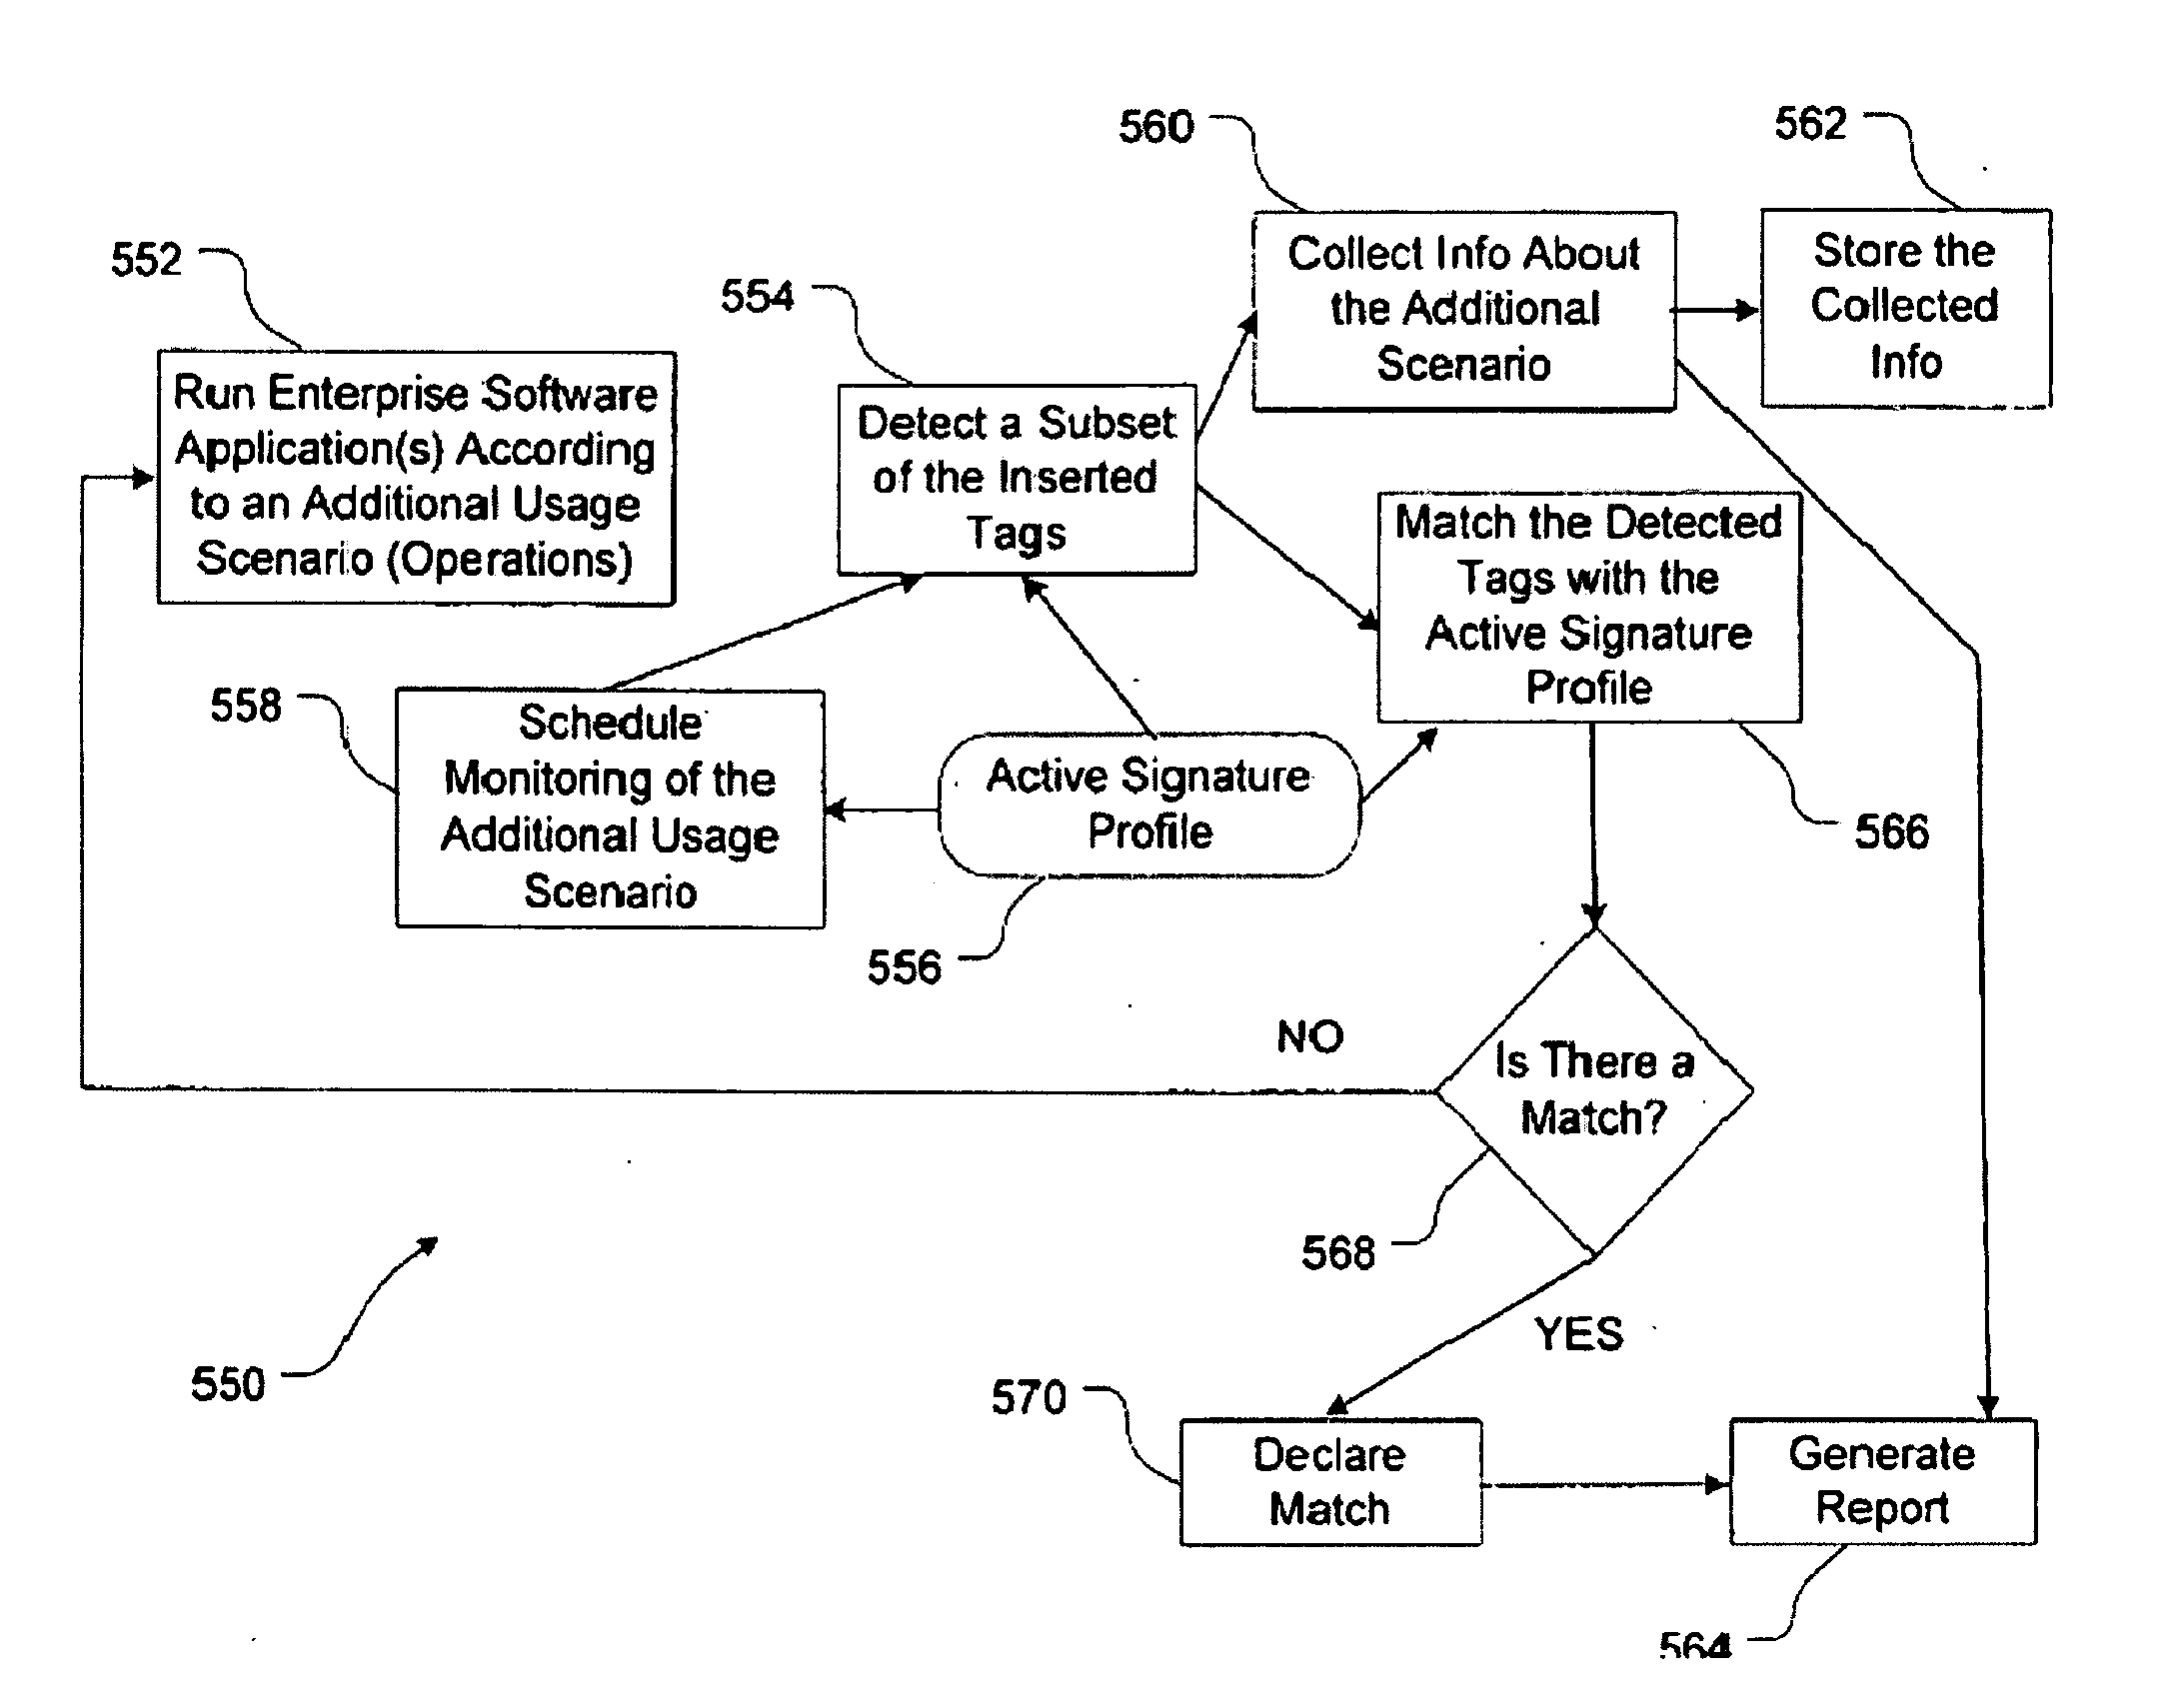 Systems and methods for monitoring and detecting fraudulent uses of business applications